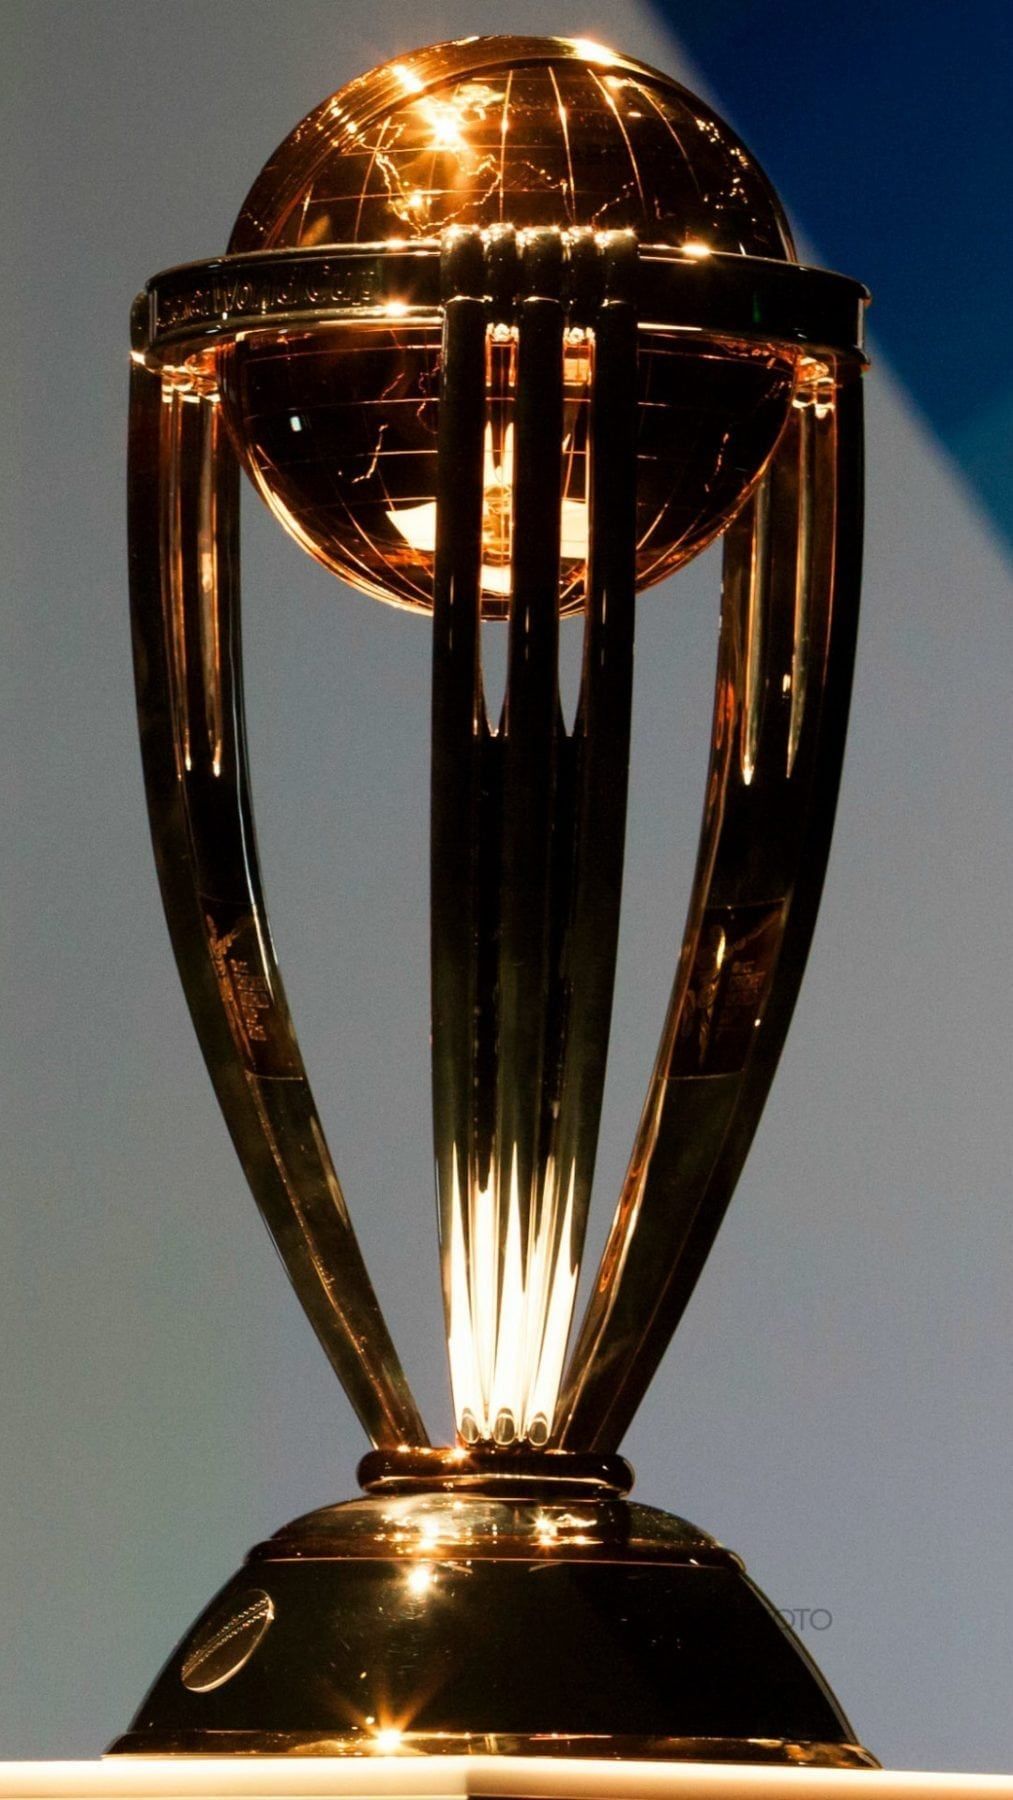 Cricket World Cup 2015 Wallpaper For iPhone & iPad